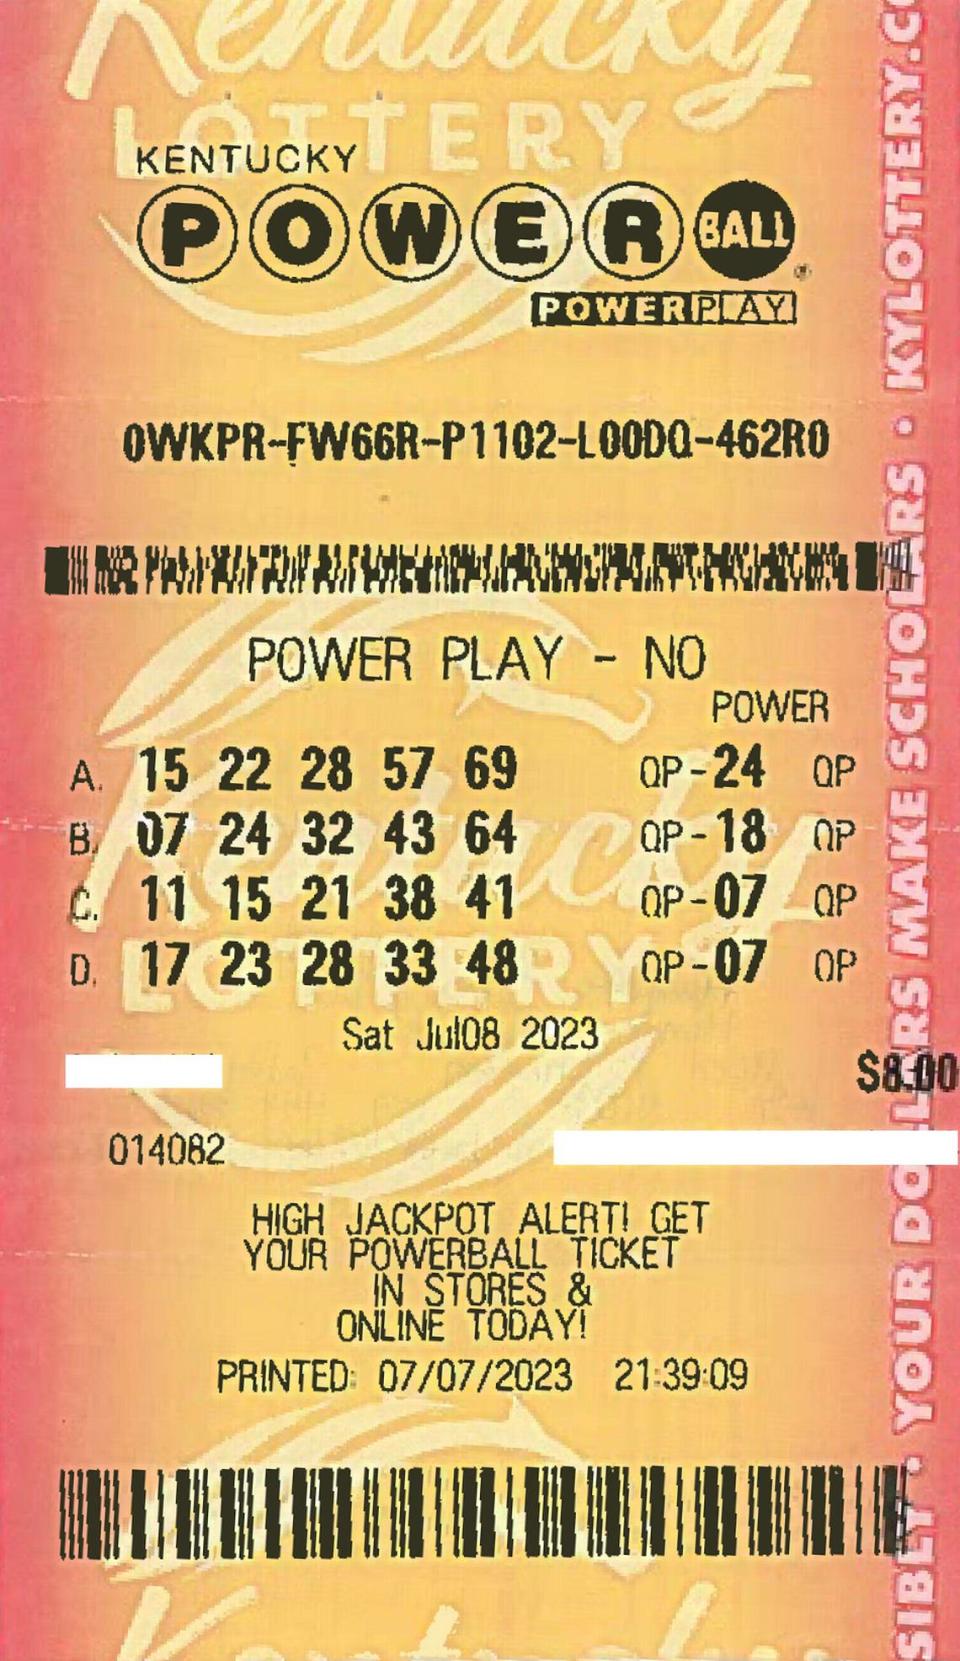 A Kentucky man won $50,000 playing Powerball Saturday with this ticket, matching four numbers and the red Powerball. Monday’s estimated jackpot has grown to $675 million.